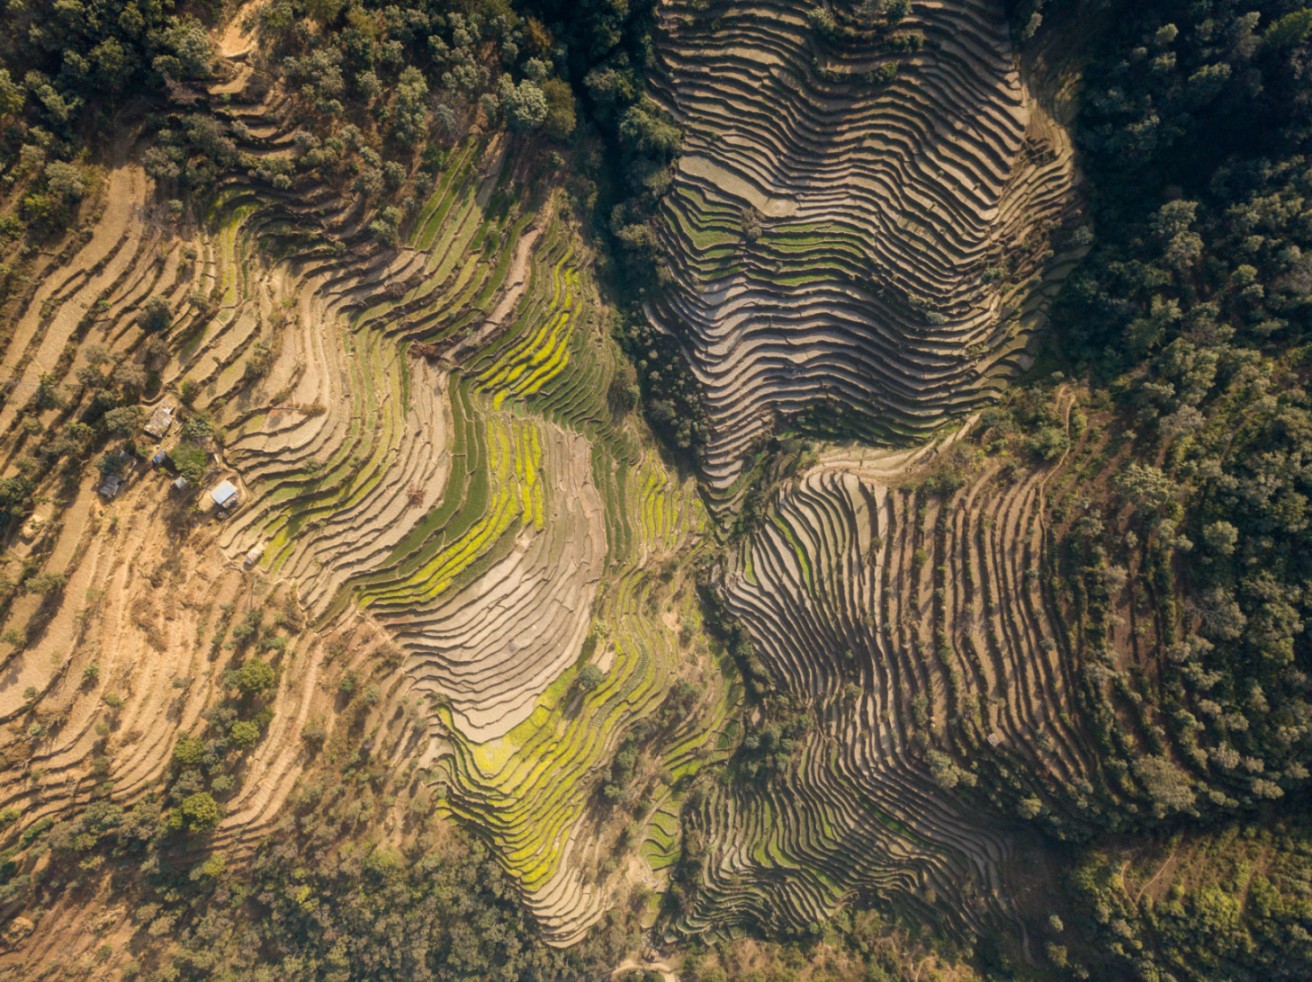 Farms and forests in Chautara, Sindhupalchok district in the Sacred Himalayan Landscape in Nepal.